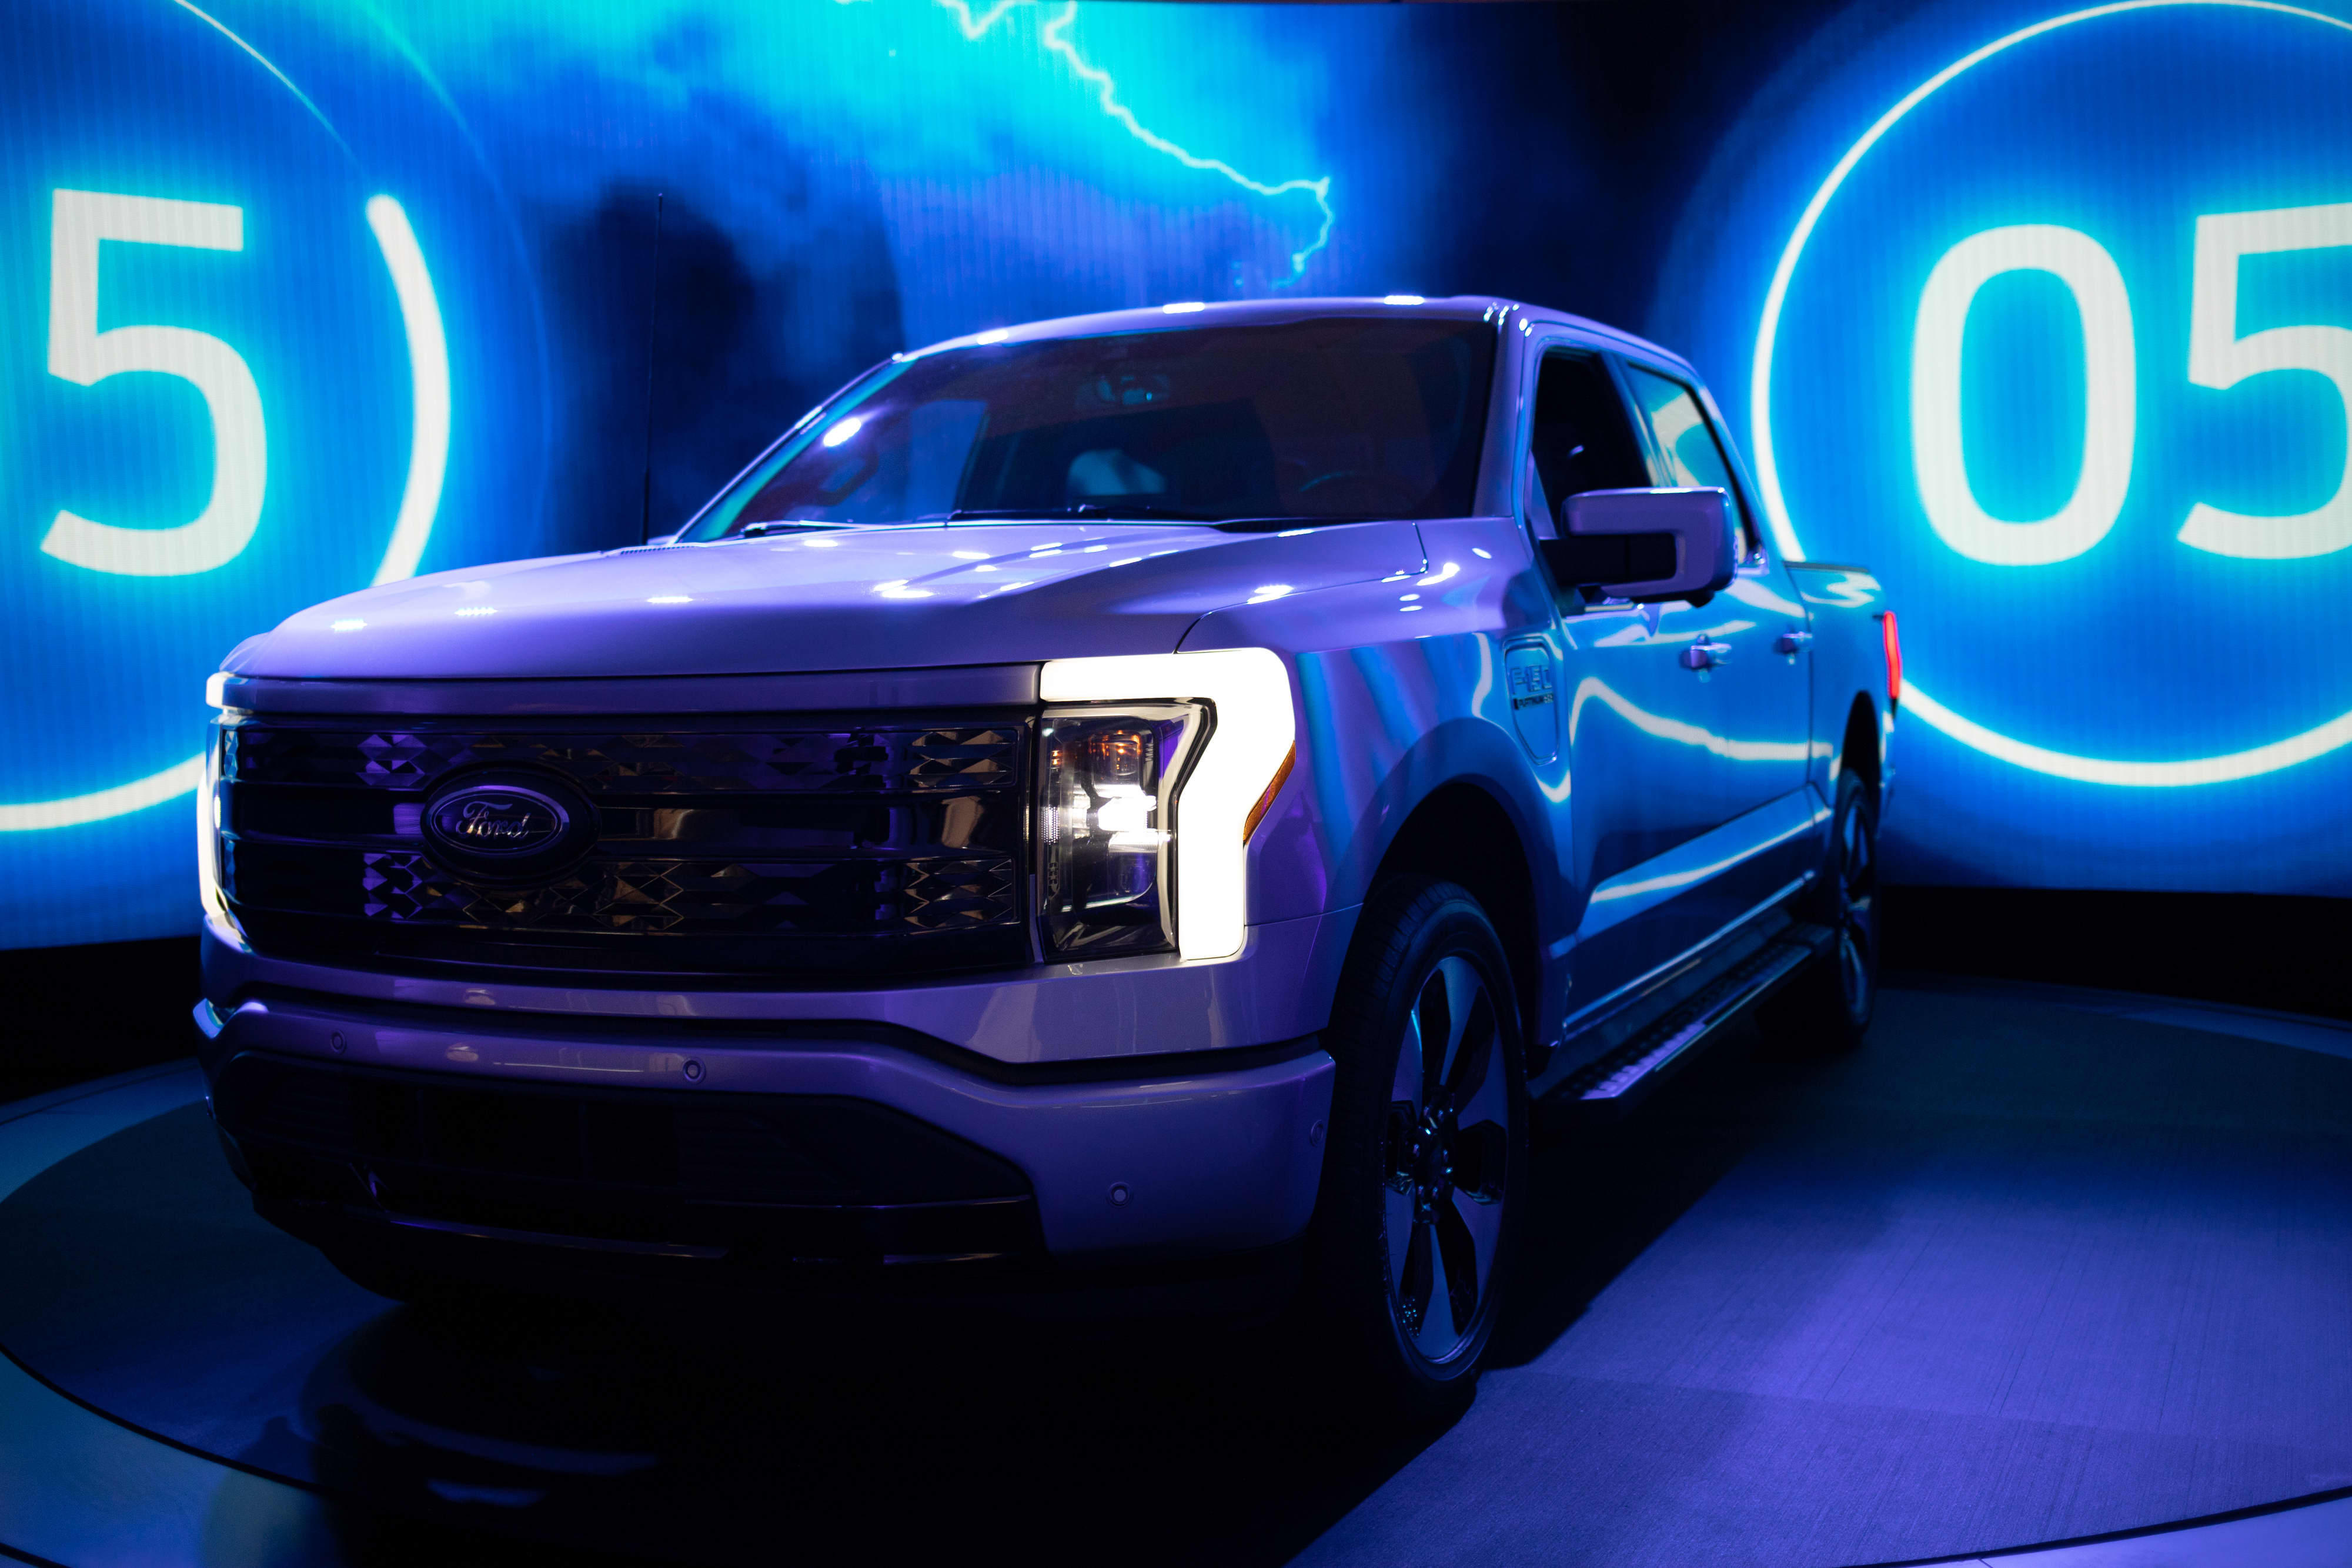 Ford reportedly plans to increase EV spending by up to $20 billion